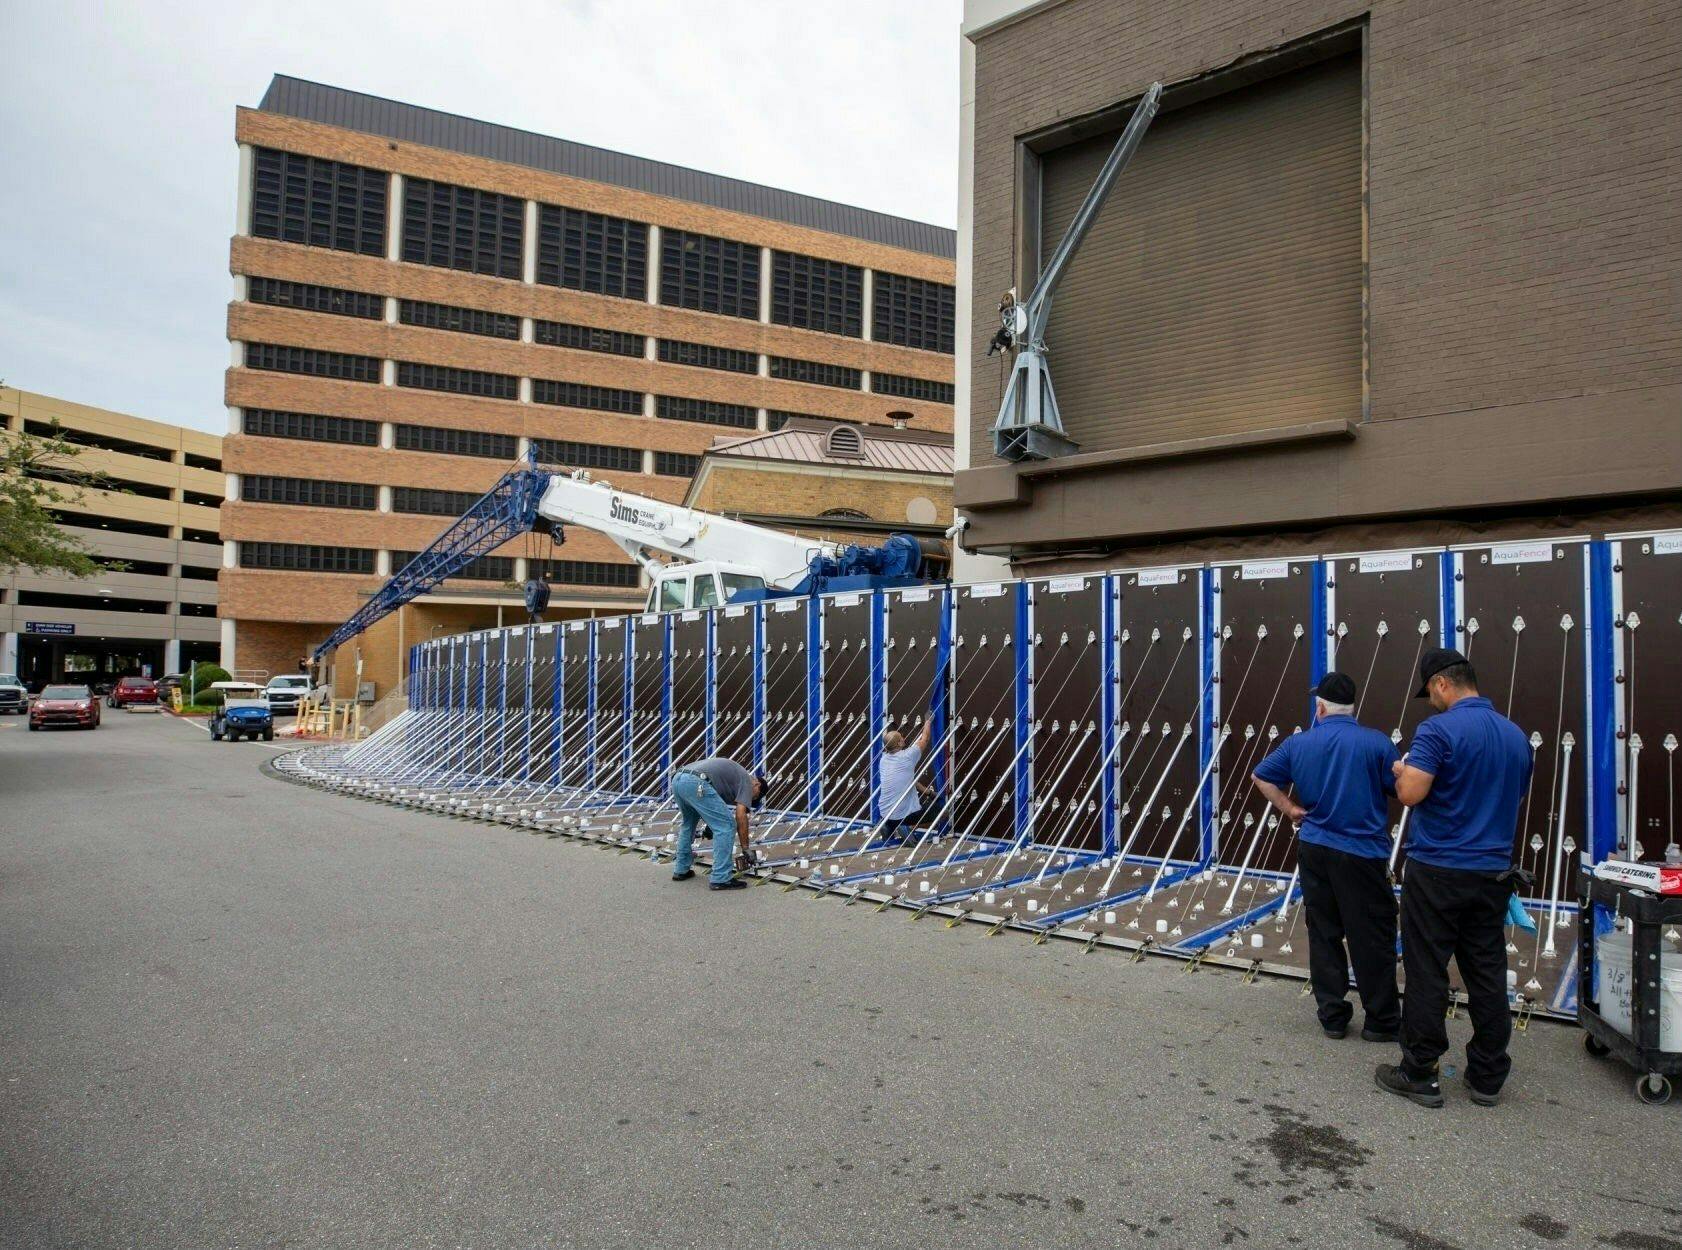 Before the arrival of Hurricane Idalia, Tampa General Hospital installed its AquaFence, a temporary barrier designed to withstand storm surge up to 15 feet above sea level. Tampa General said the fence prevented flooding. (Photo: Tampa General Hospital)